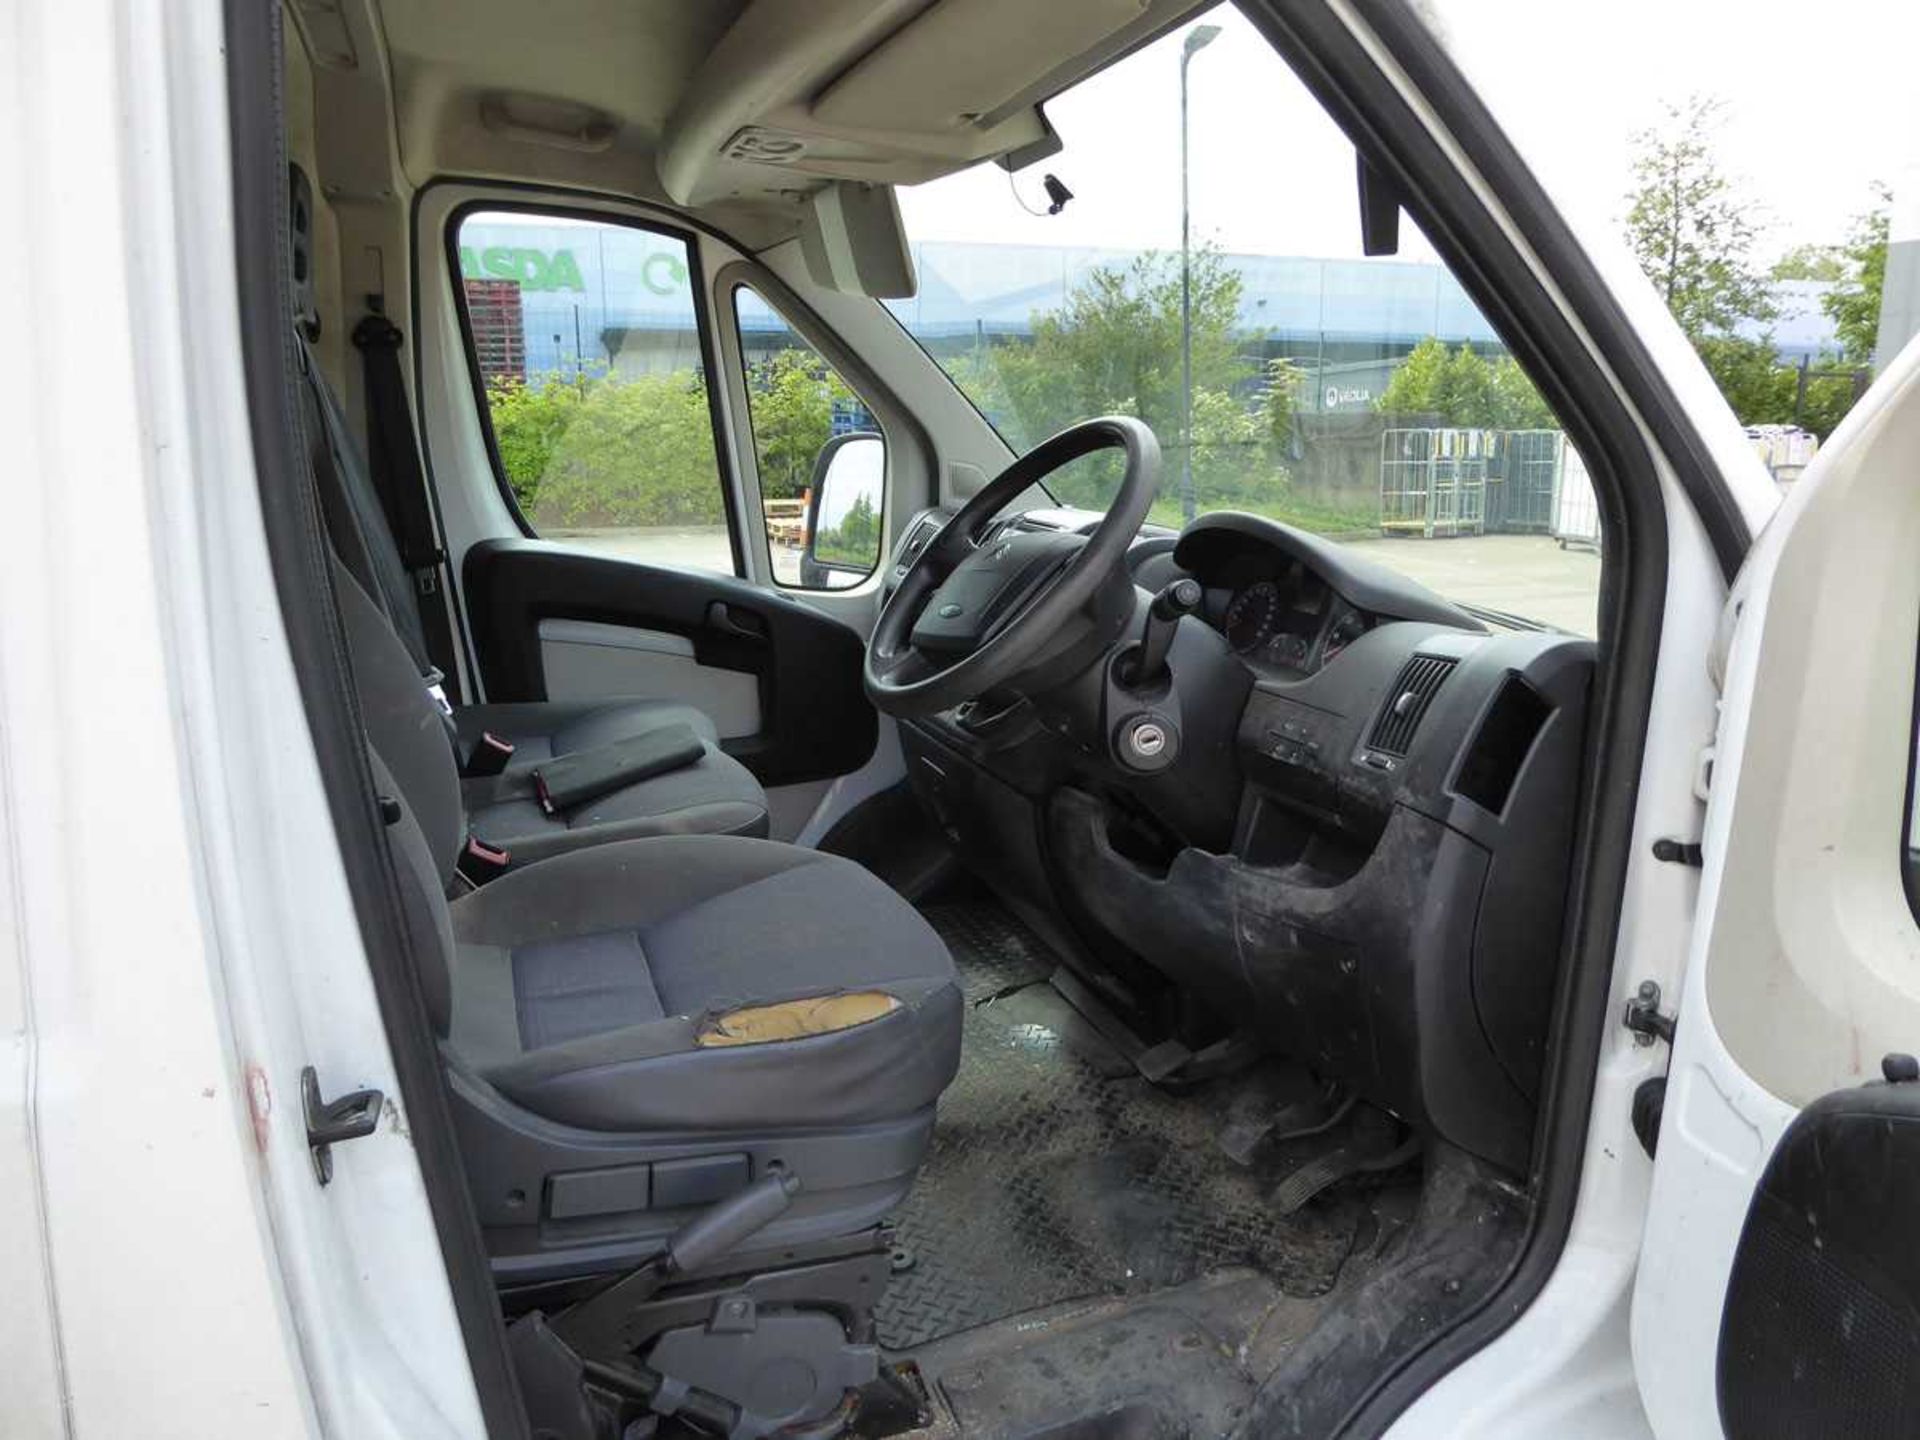 (YX61 YPF) 2011 Citroen Relay 35 L3H2 Enterprise Blue HDi panel van in white with frail, 2198cc - Image 12 of 15